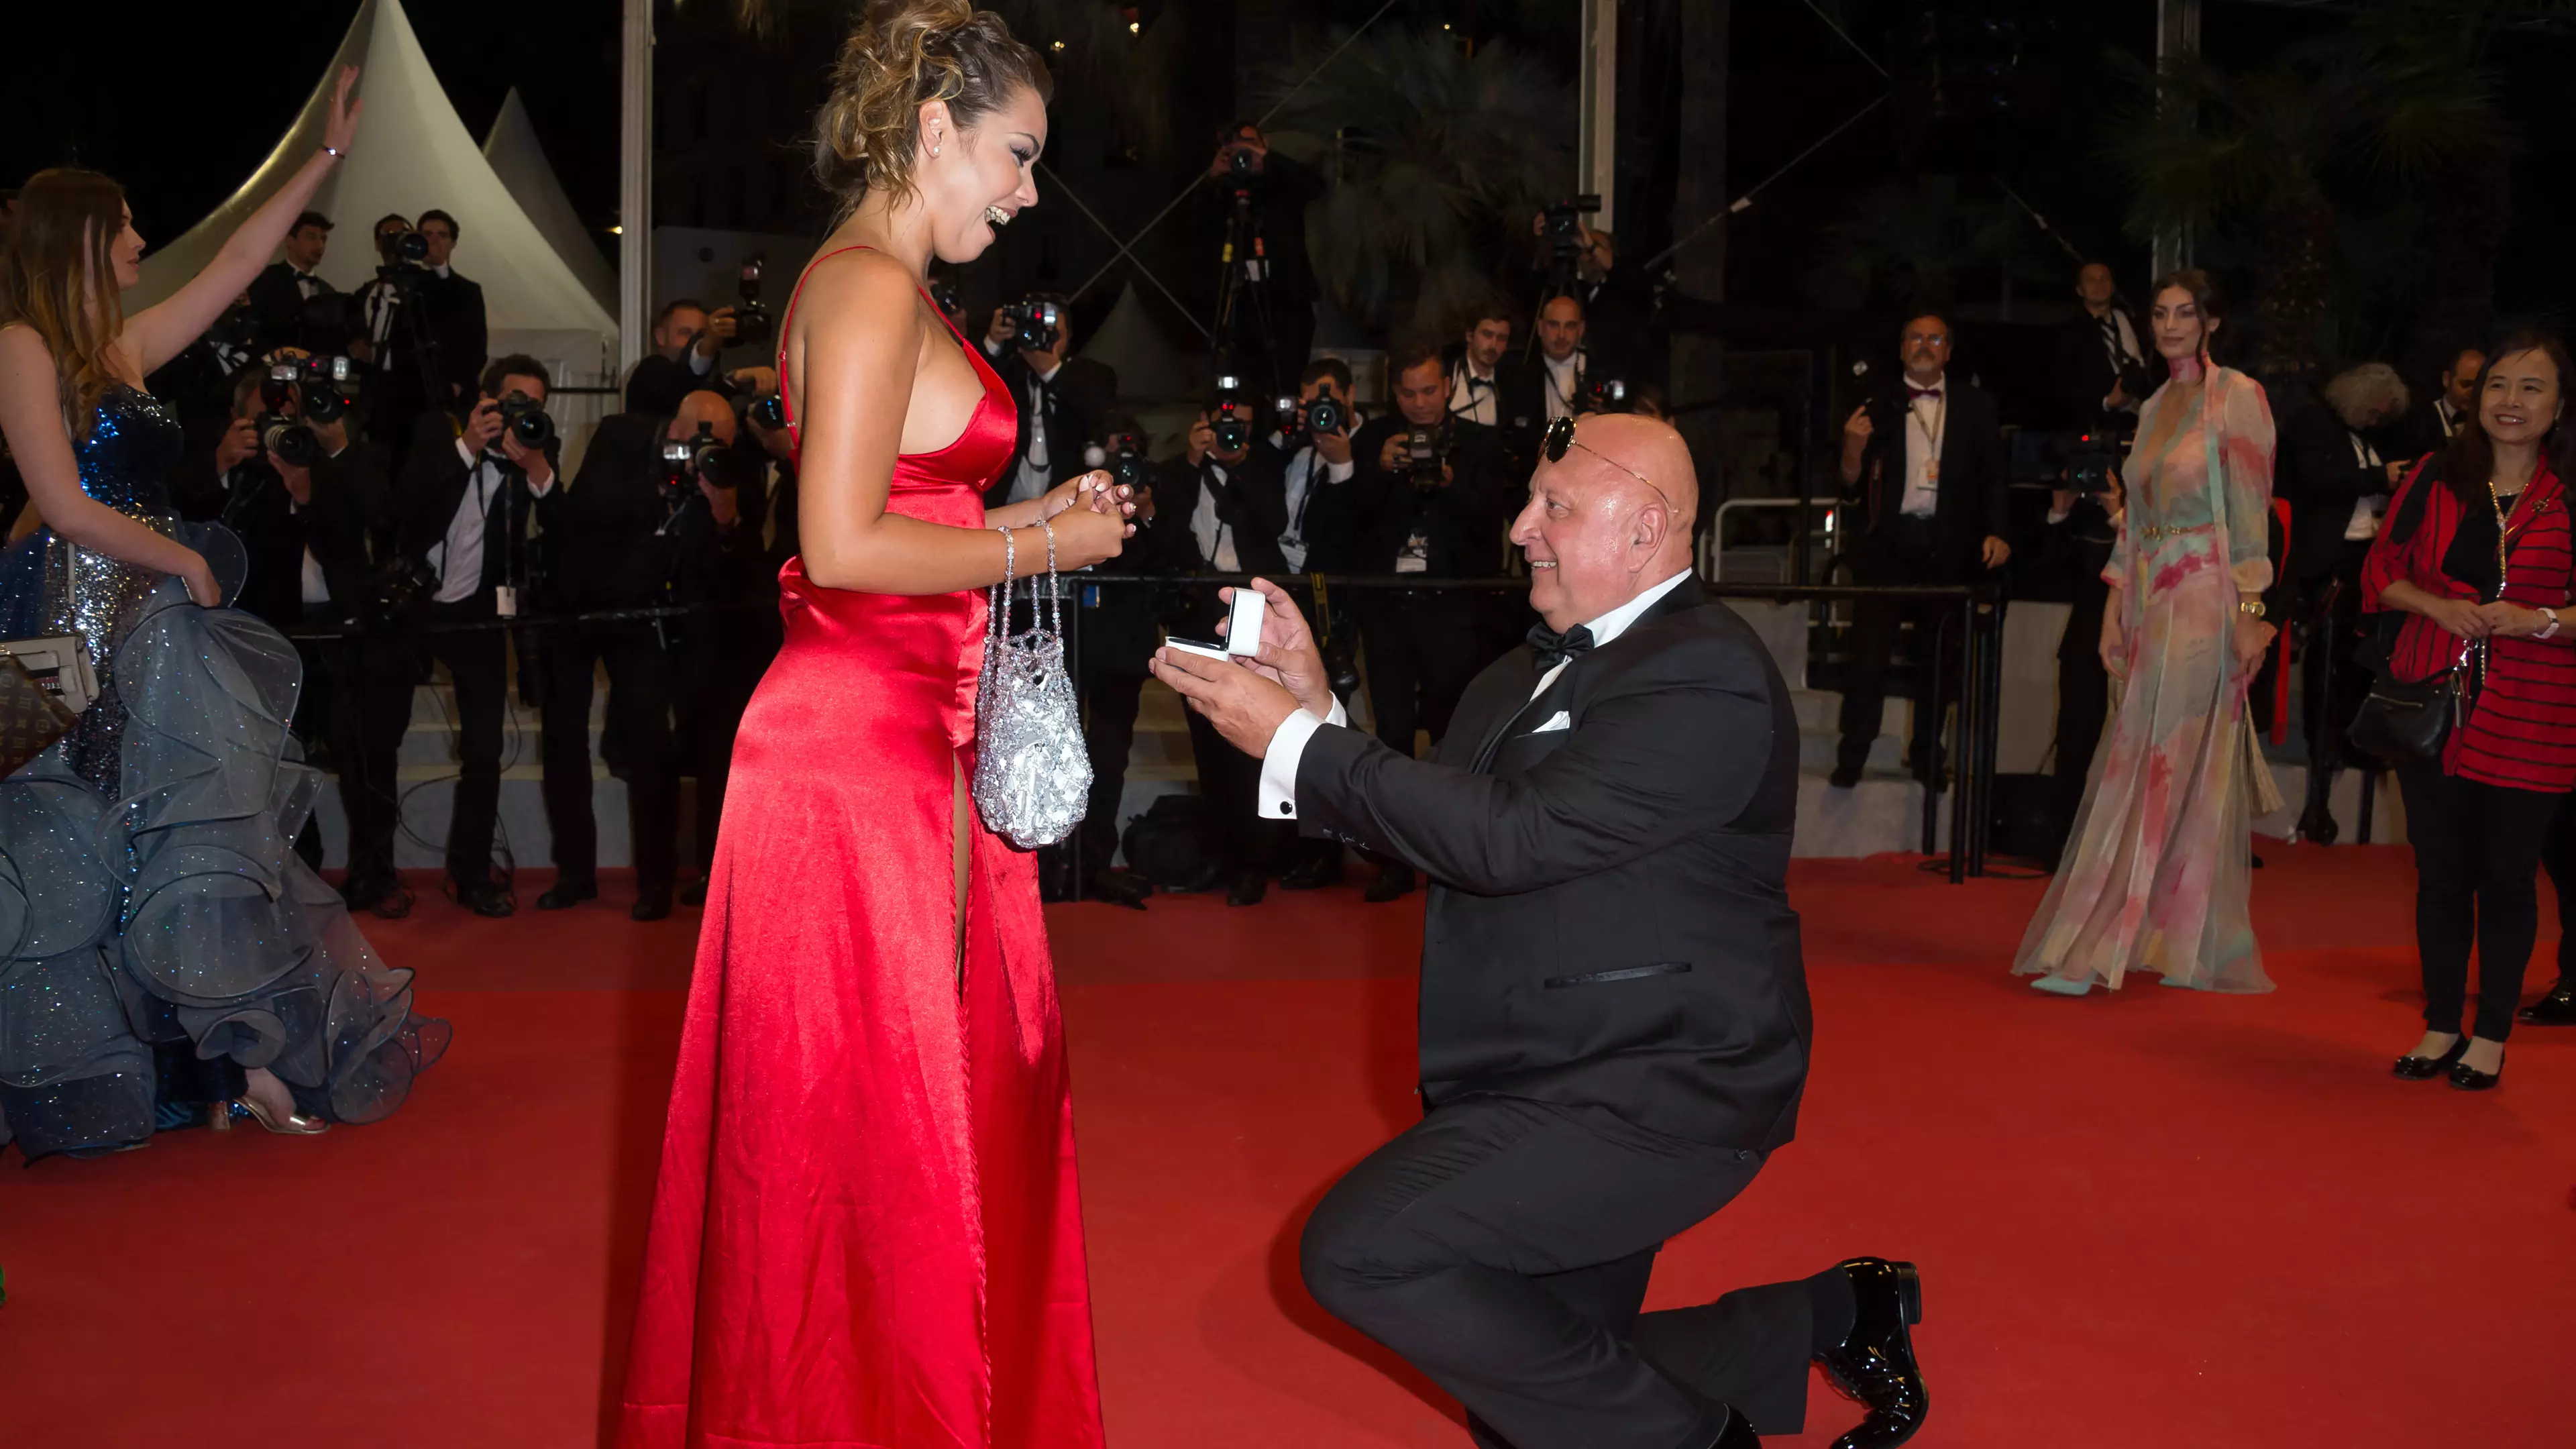 Millionaire Club Owner Proposes To Reality TV Star Girlfriend At Cannes